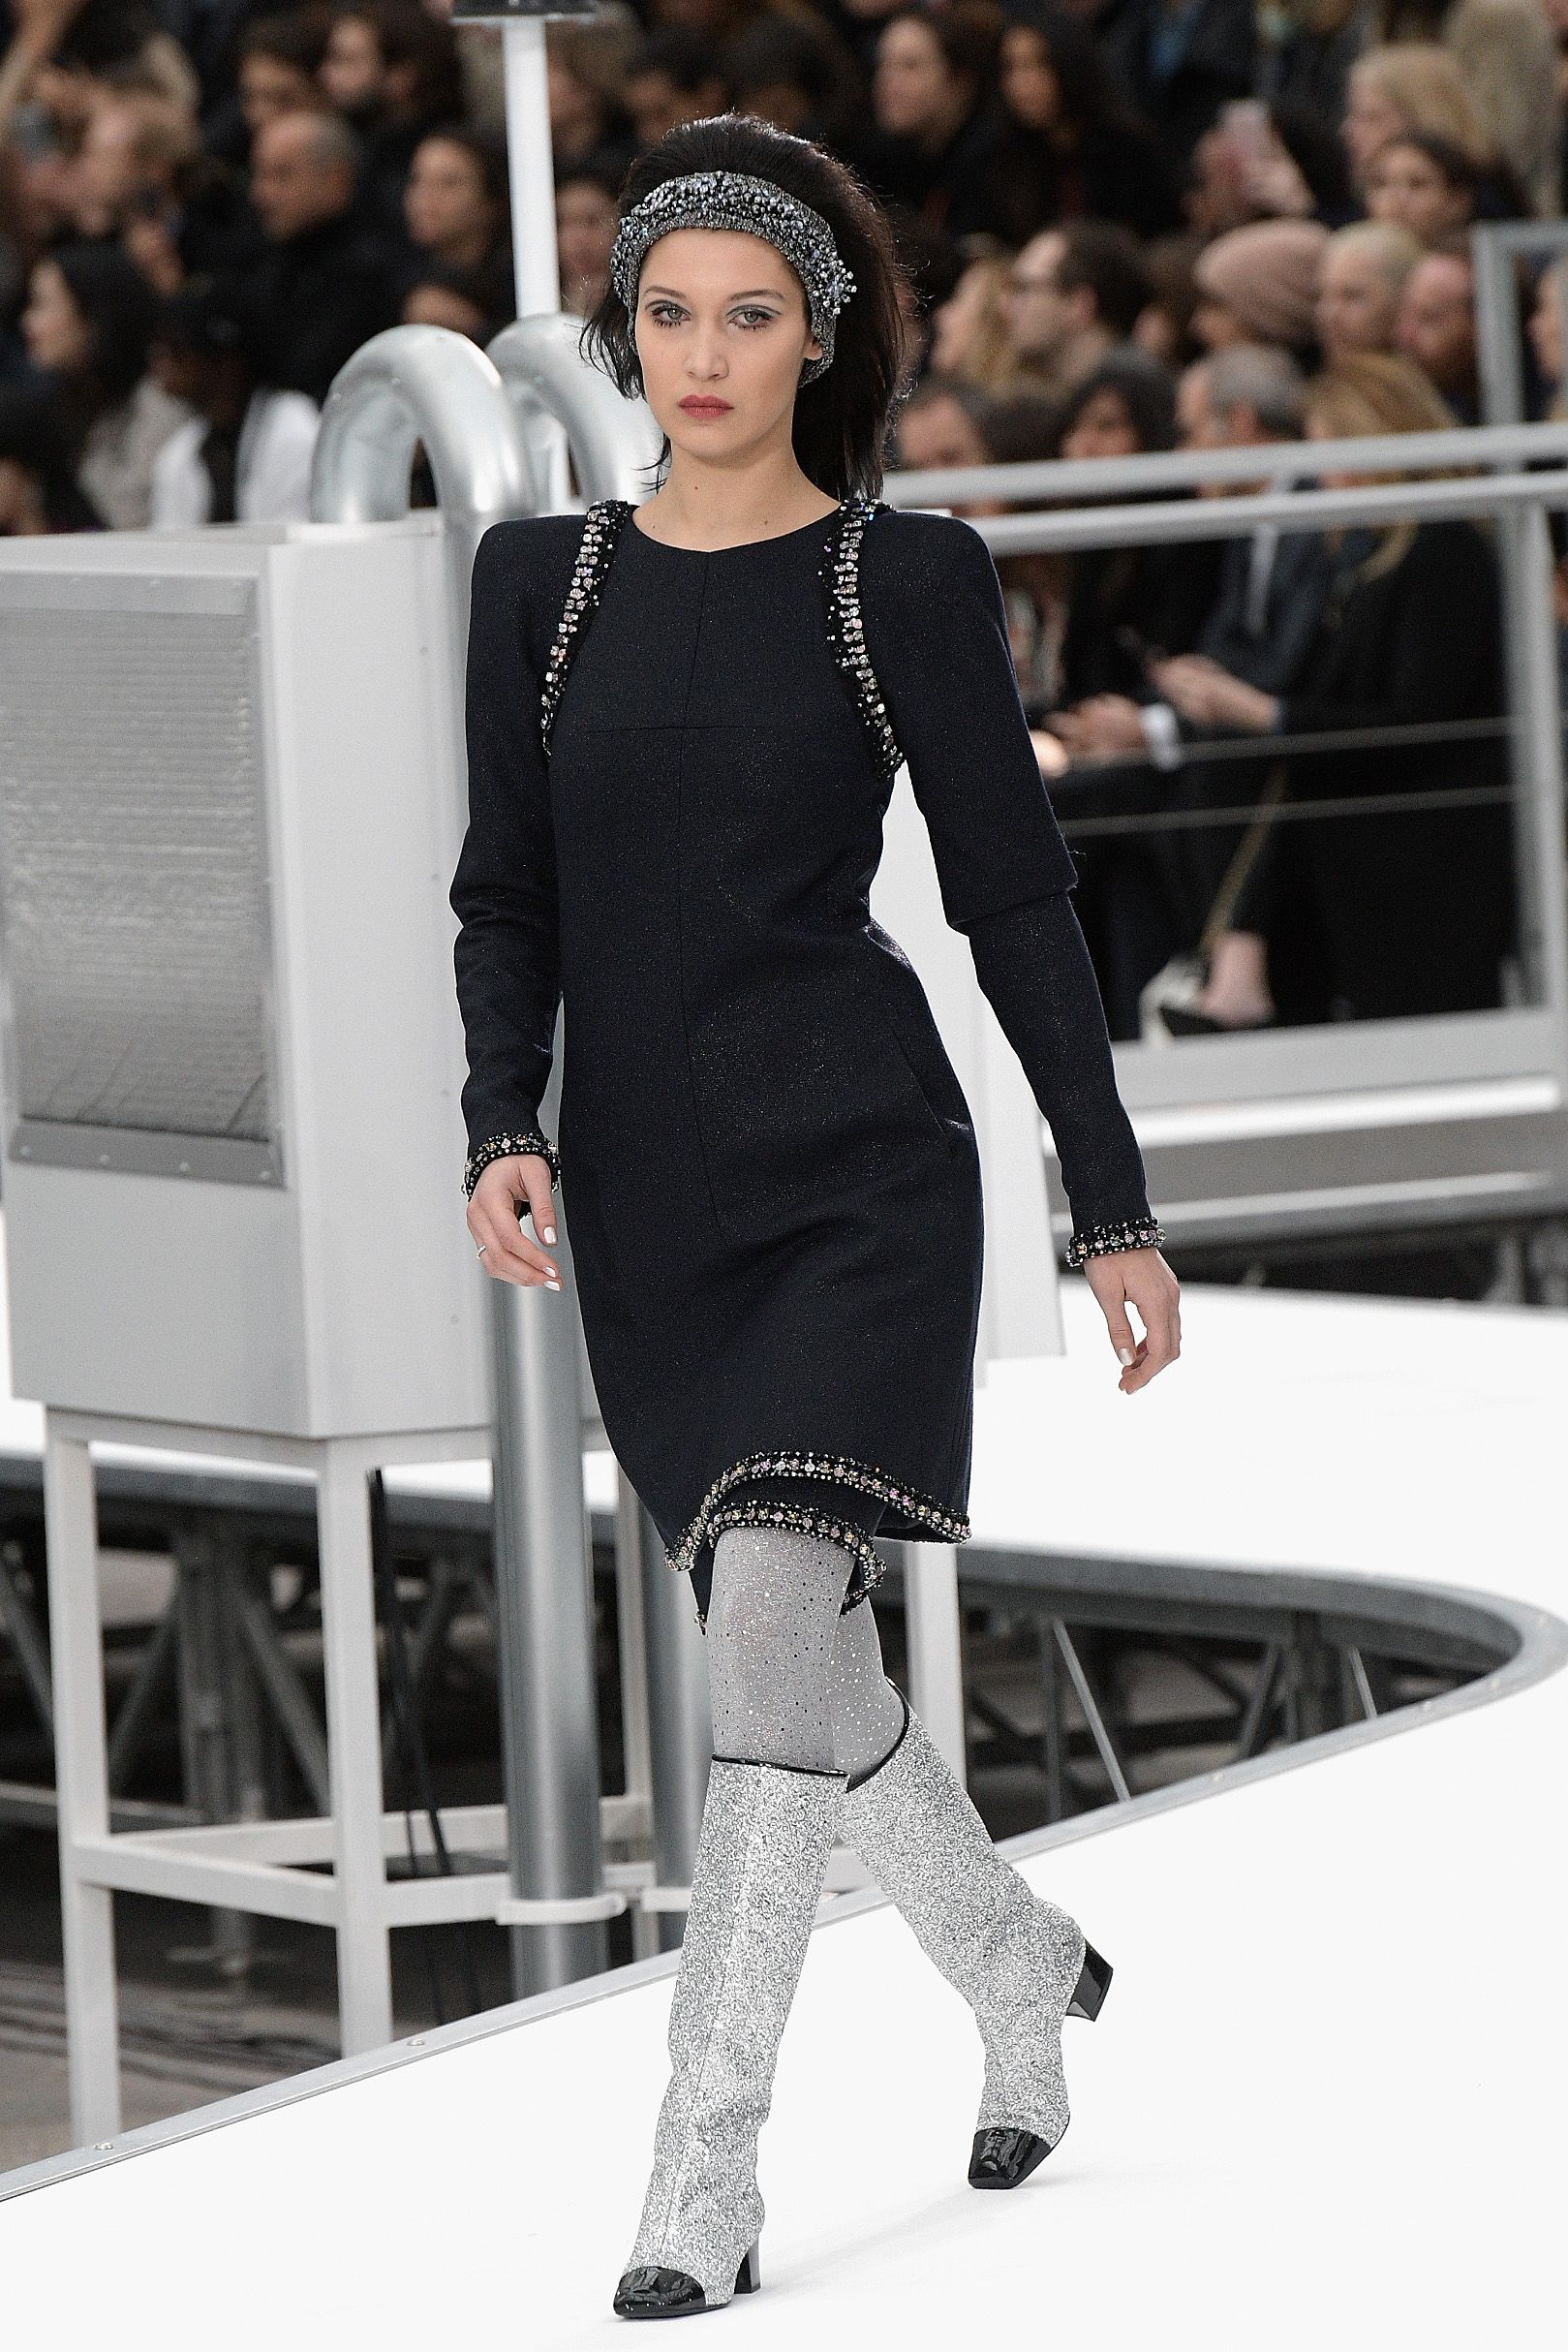 Chanel Does Space-Themed Fall/Winter 2017 Show - Chanel Paris Fashion Week  Recap